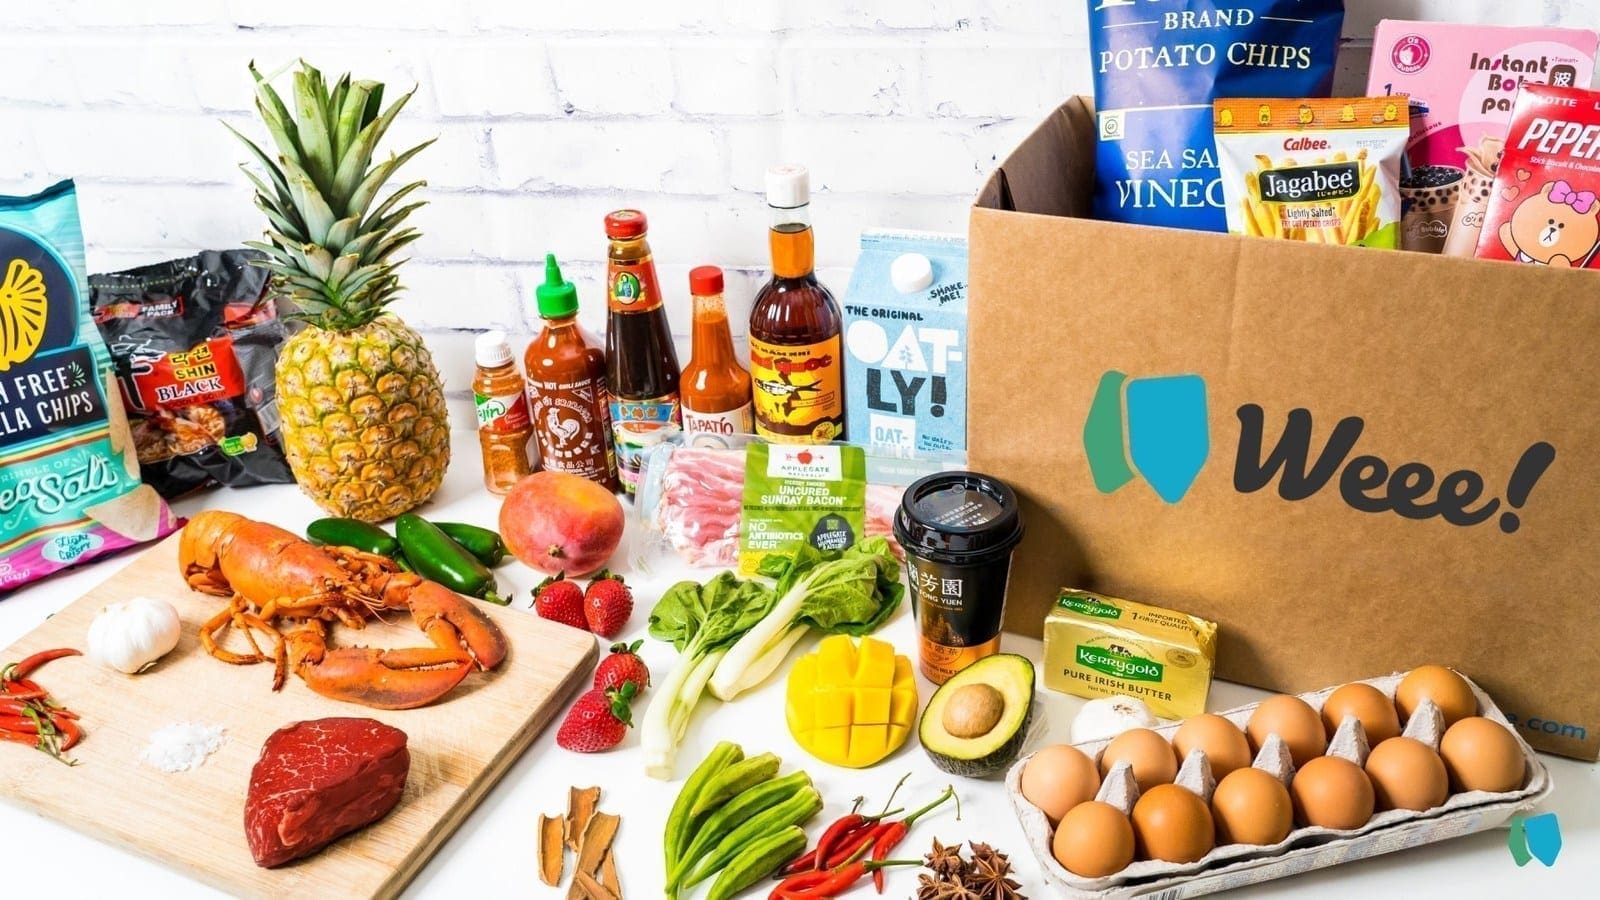 Weee! raises US$315m in funding to expand geographic expansion of ethnic e-grocer platform